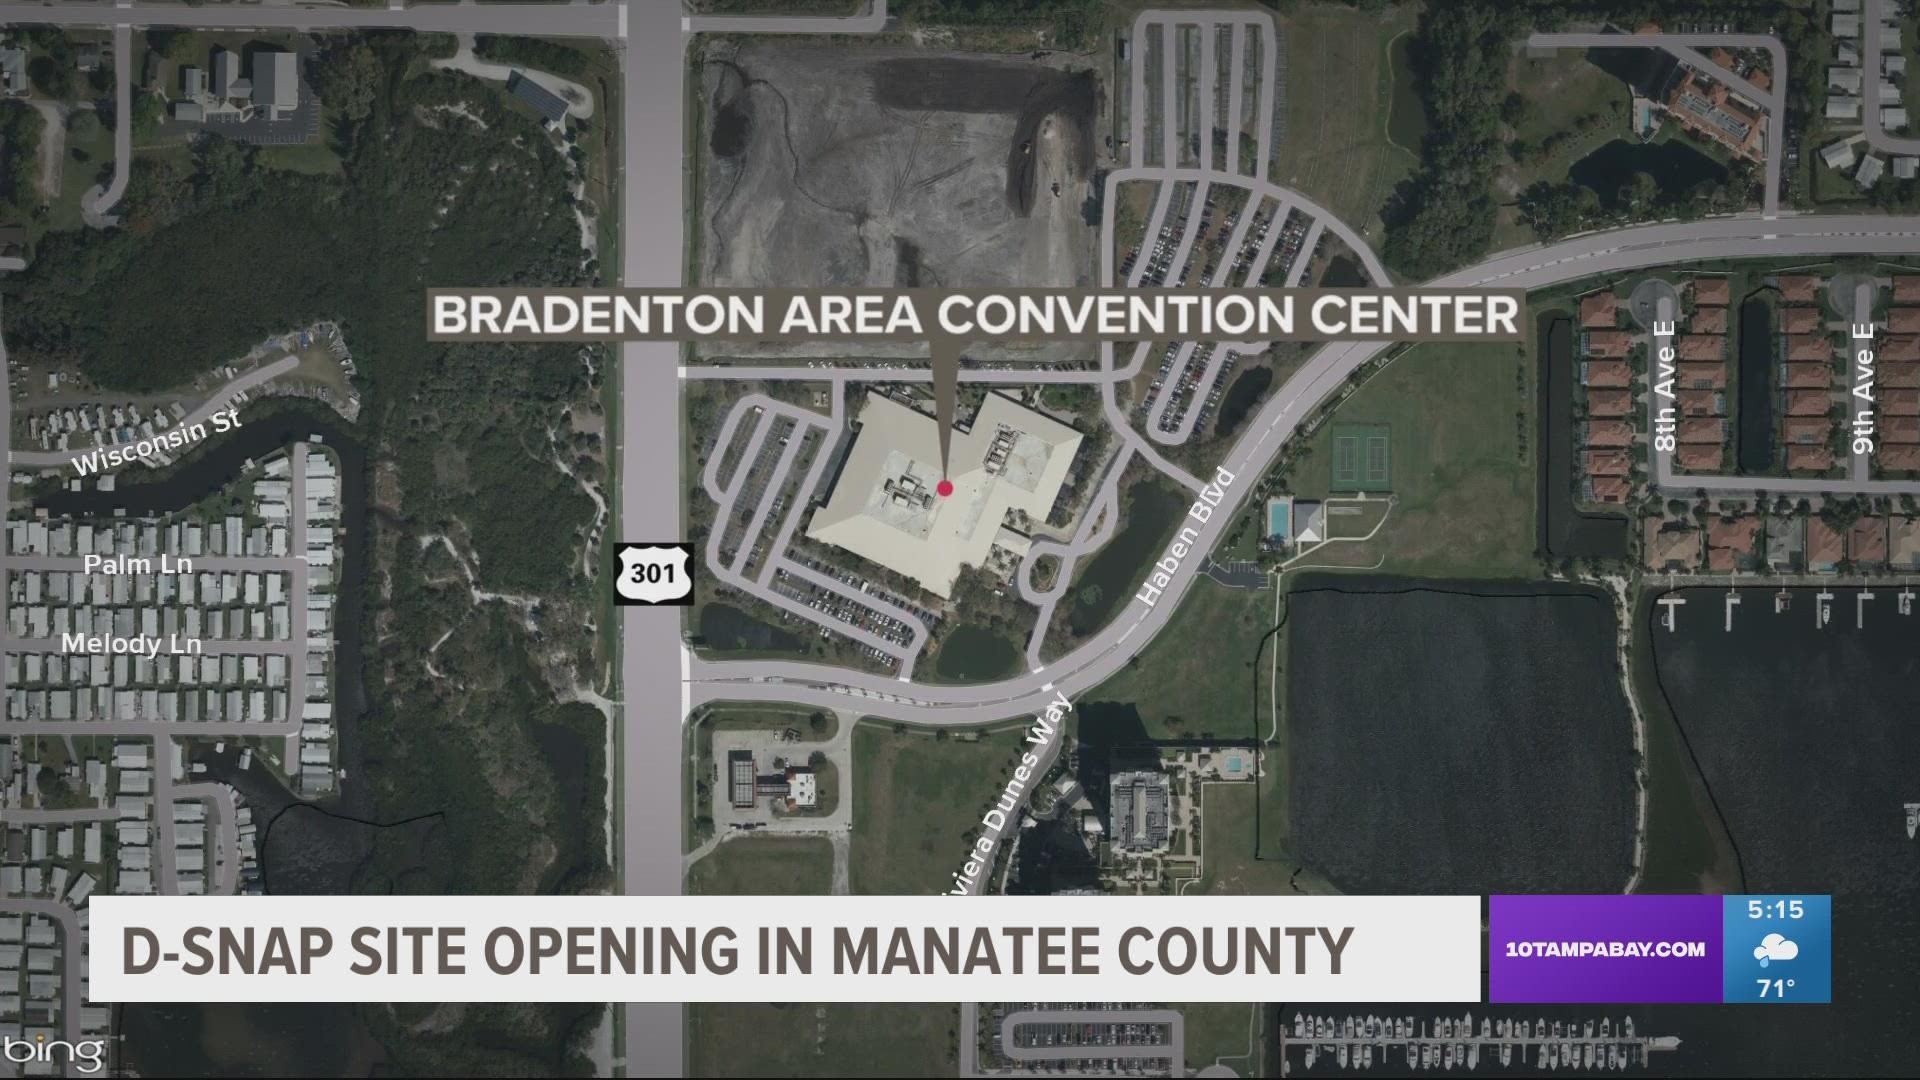 D-Snap will open a site in Palmetto at the Bradenton Area Convention Center from Dec. 2 to Dec. 4.